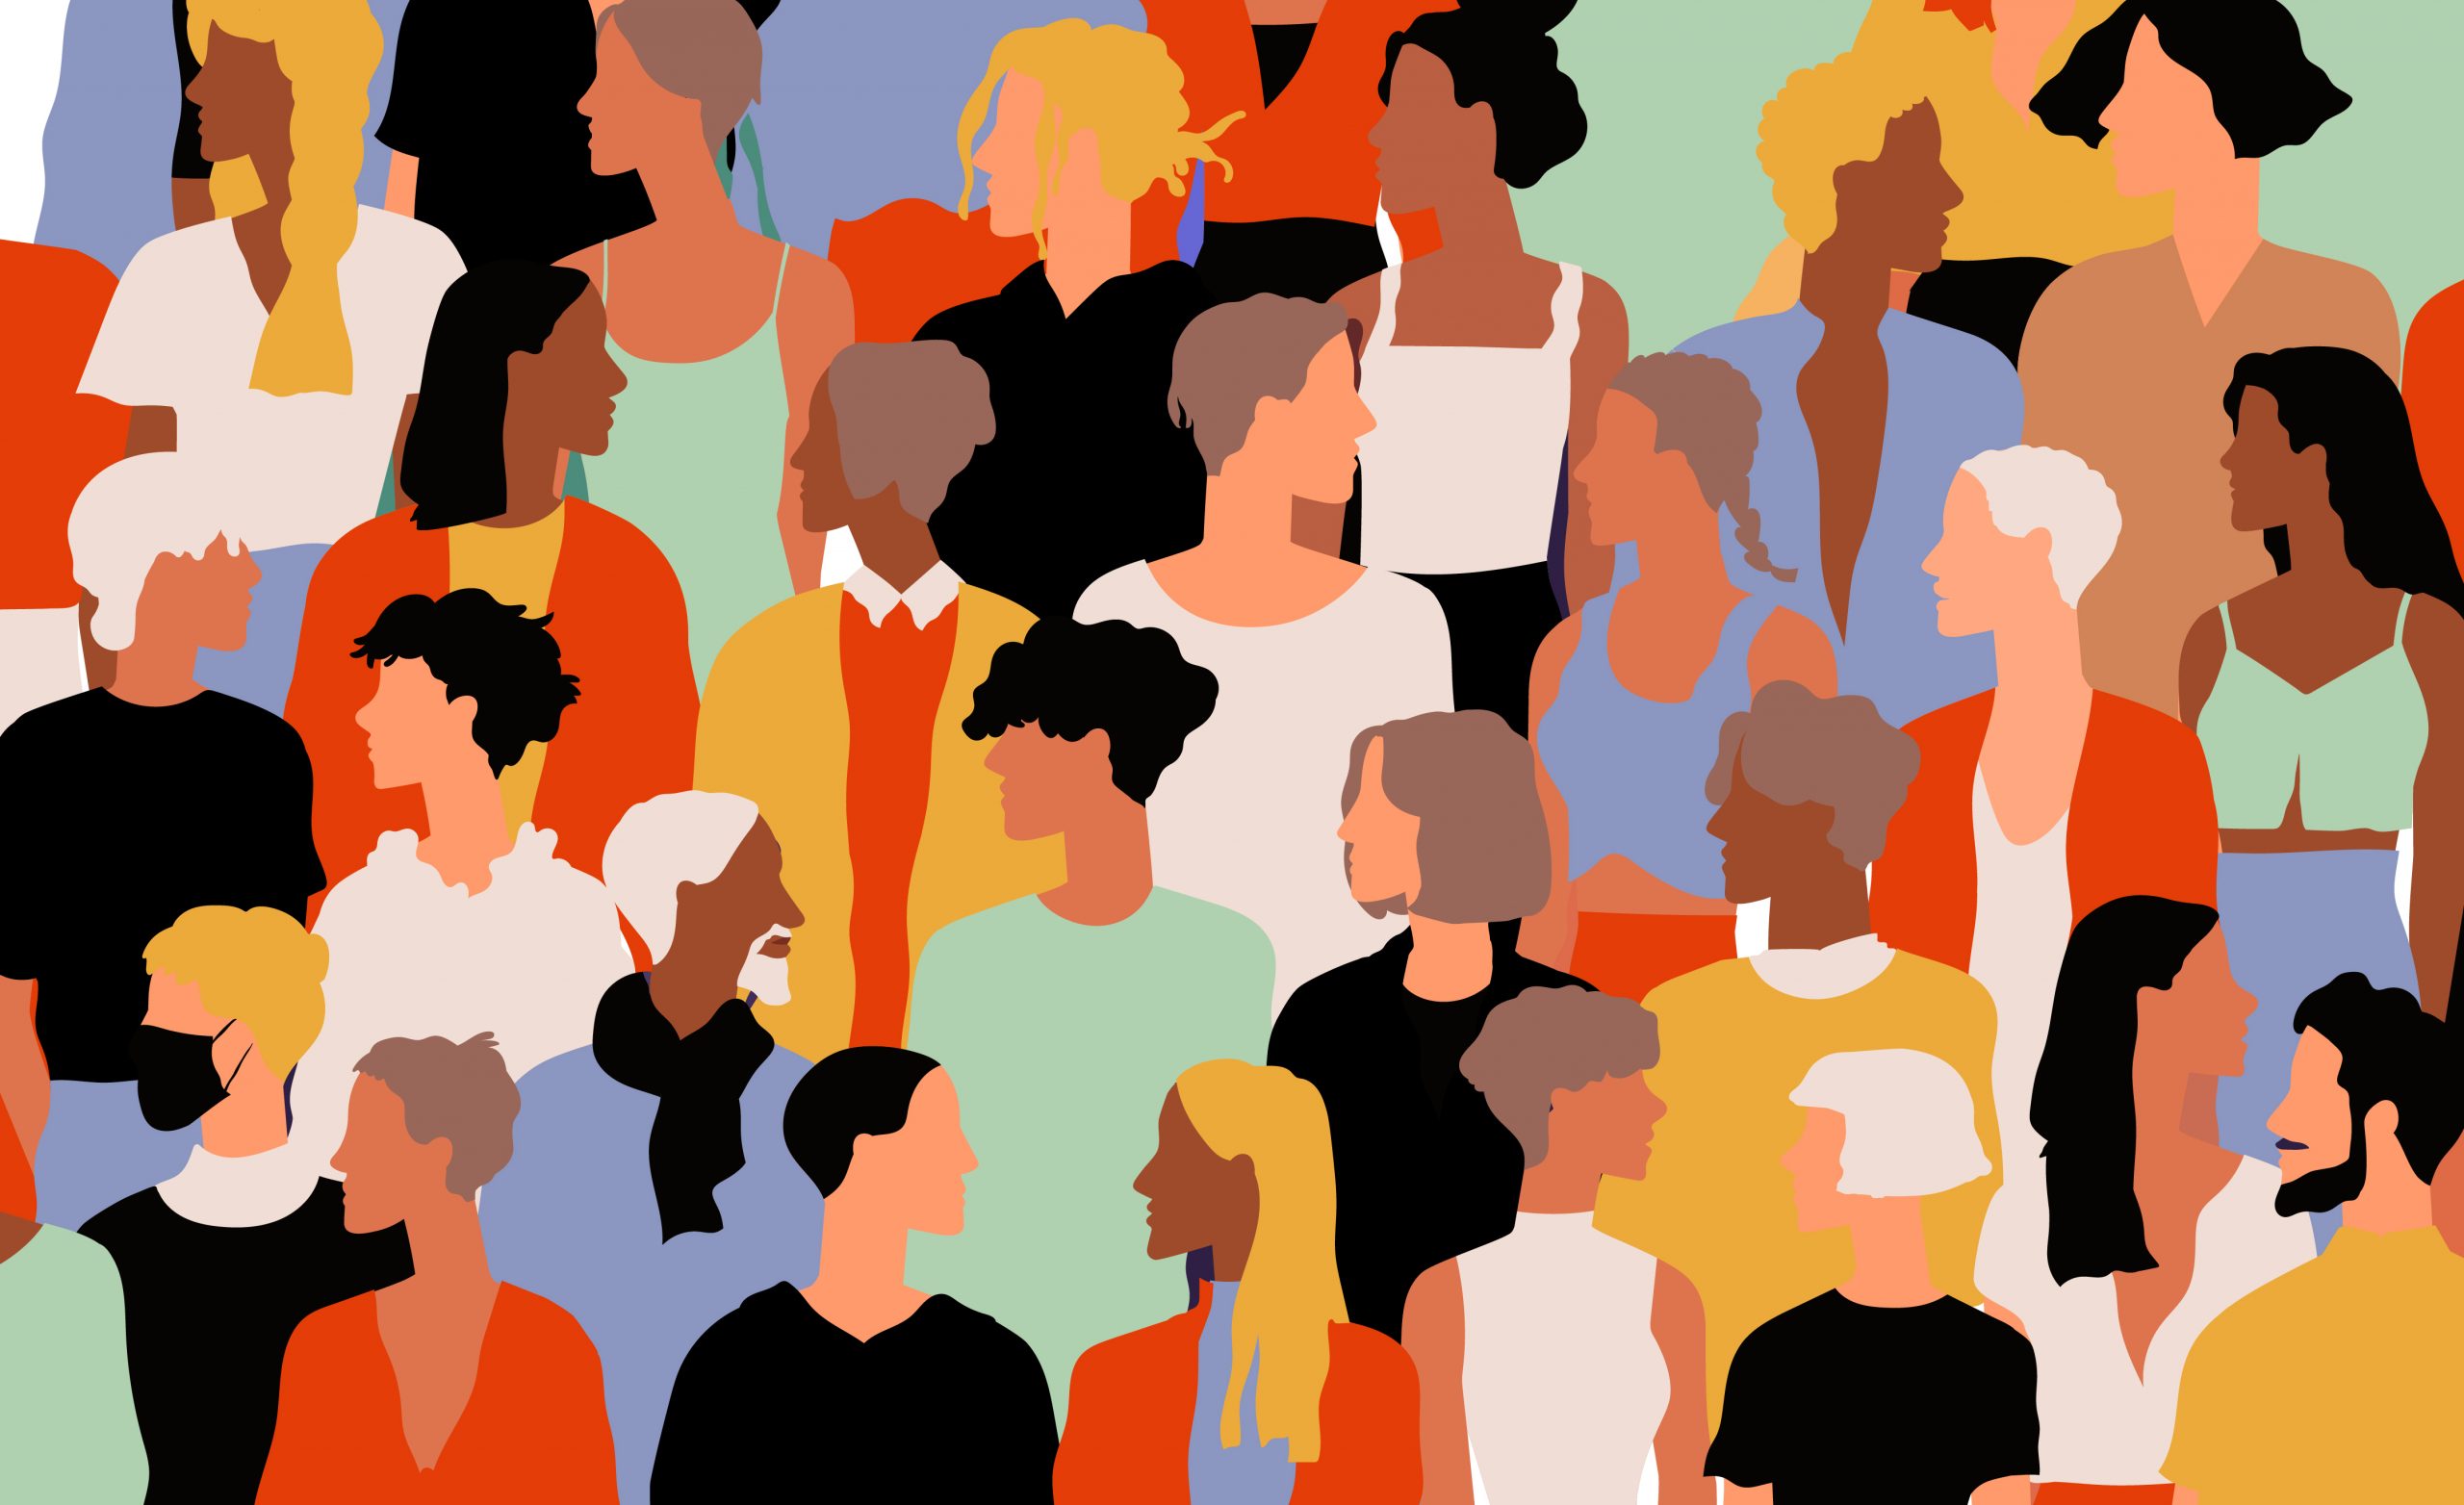 Graphic illustration of many different people standing in a crowd.